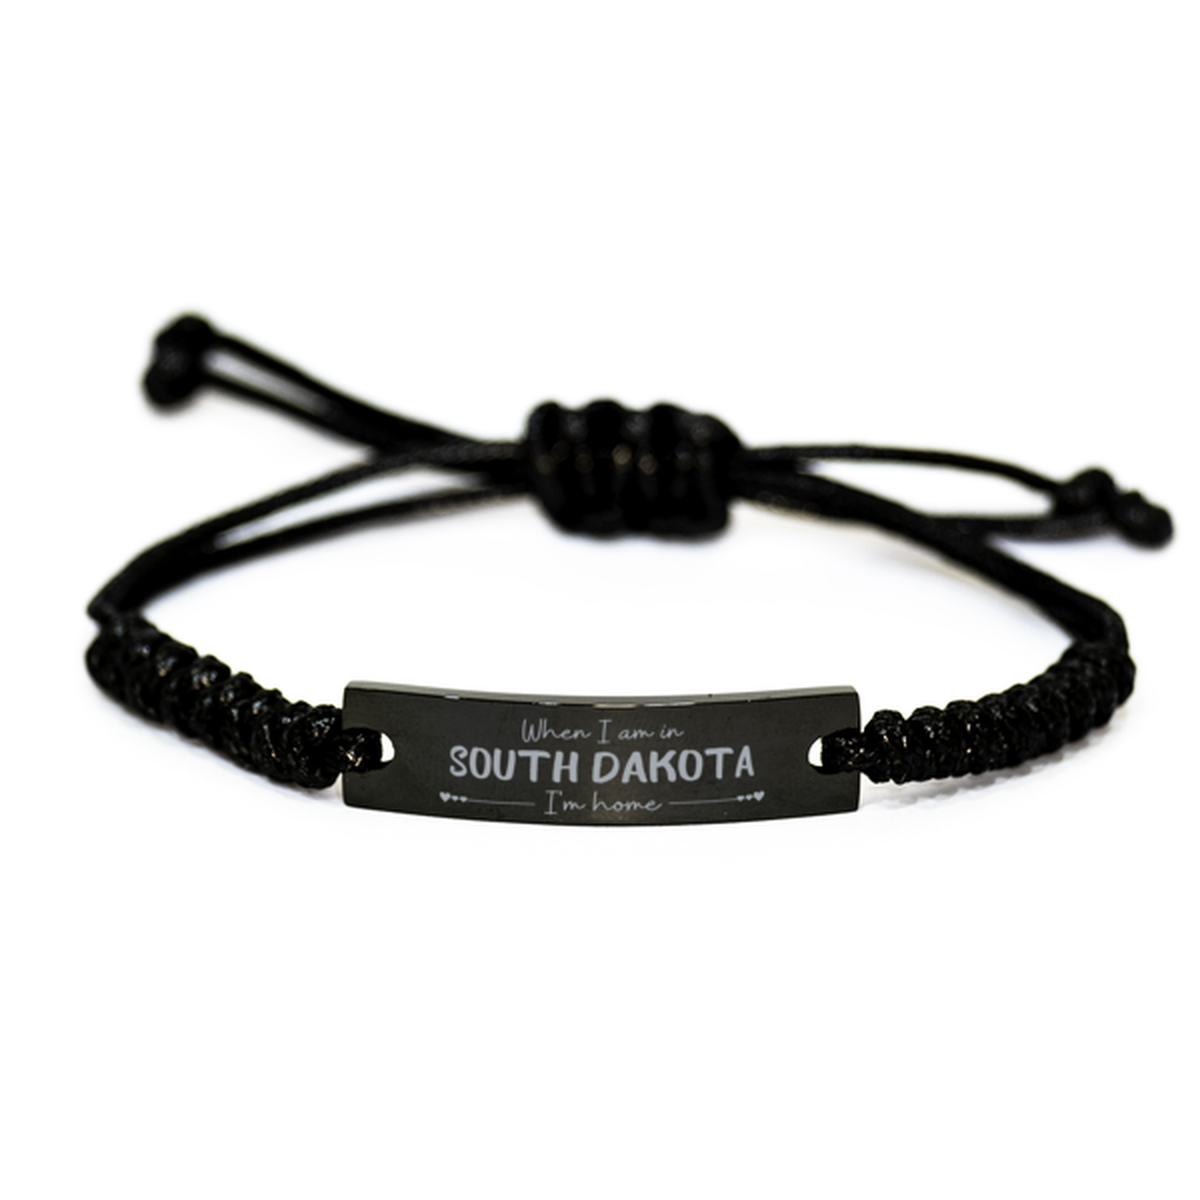 When I am in South Dakota I'm home Black Rope Bracelet, Cheap Gifts For South Dakota, State South Dakota Birthday Gifts for Friends Coworker